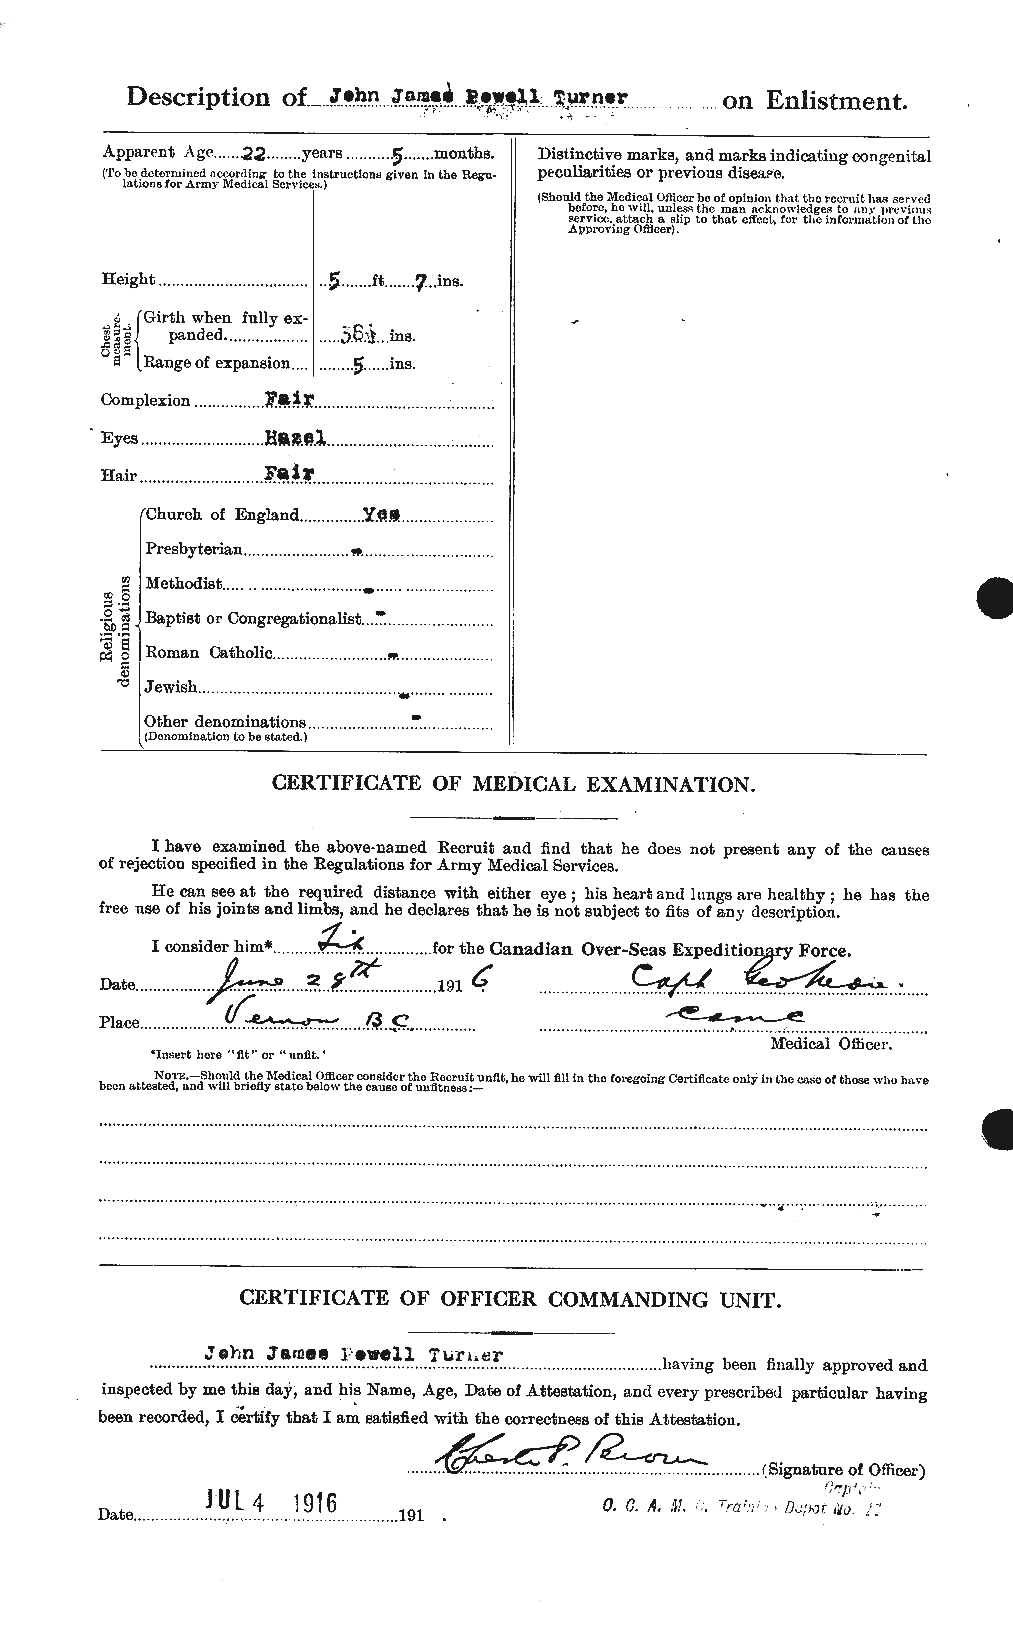 Personnel Records of the First World War - CEF 642090b